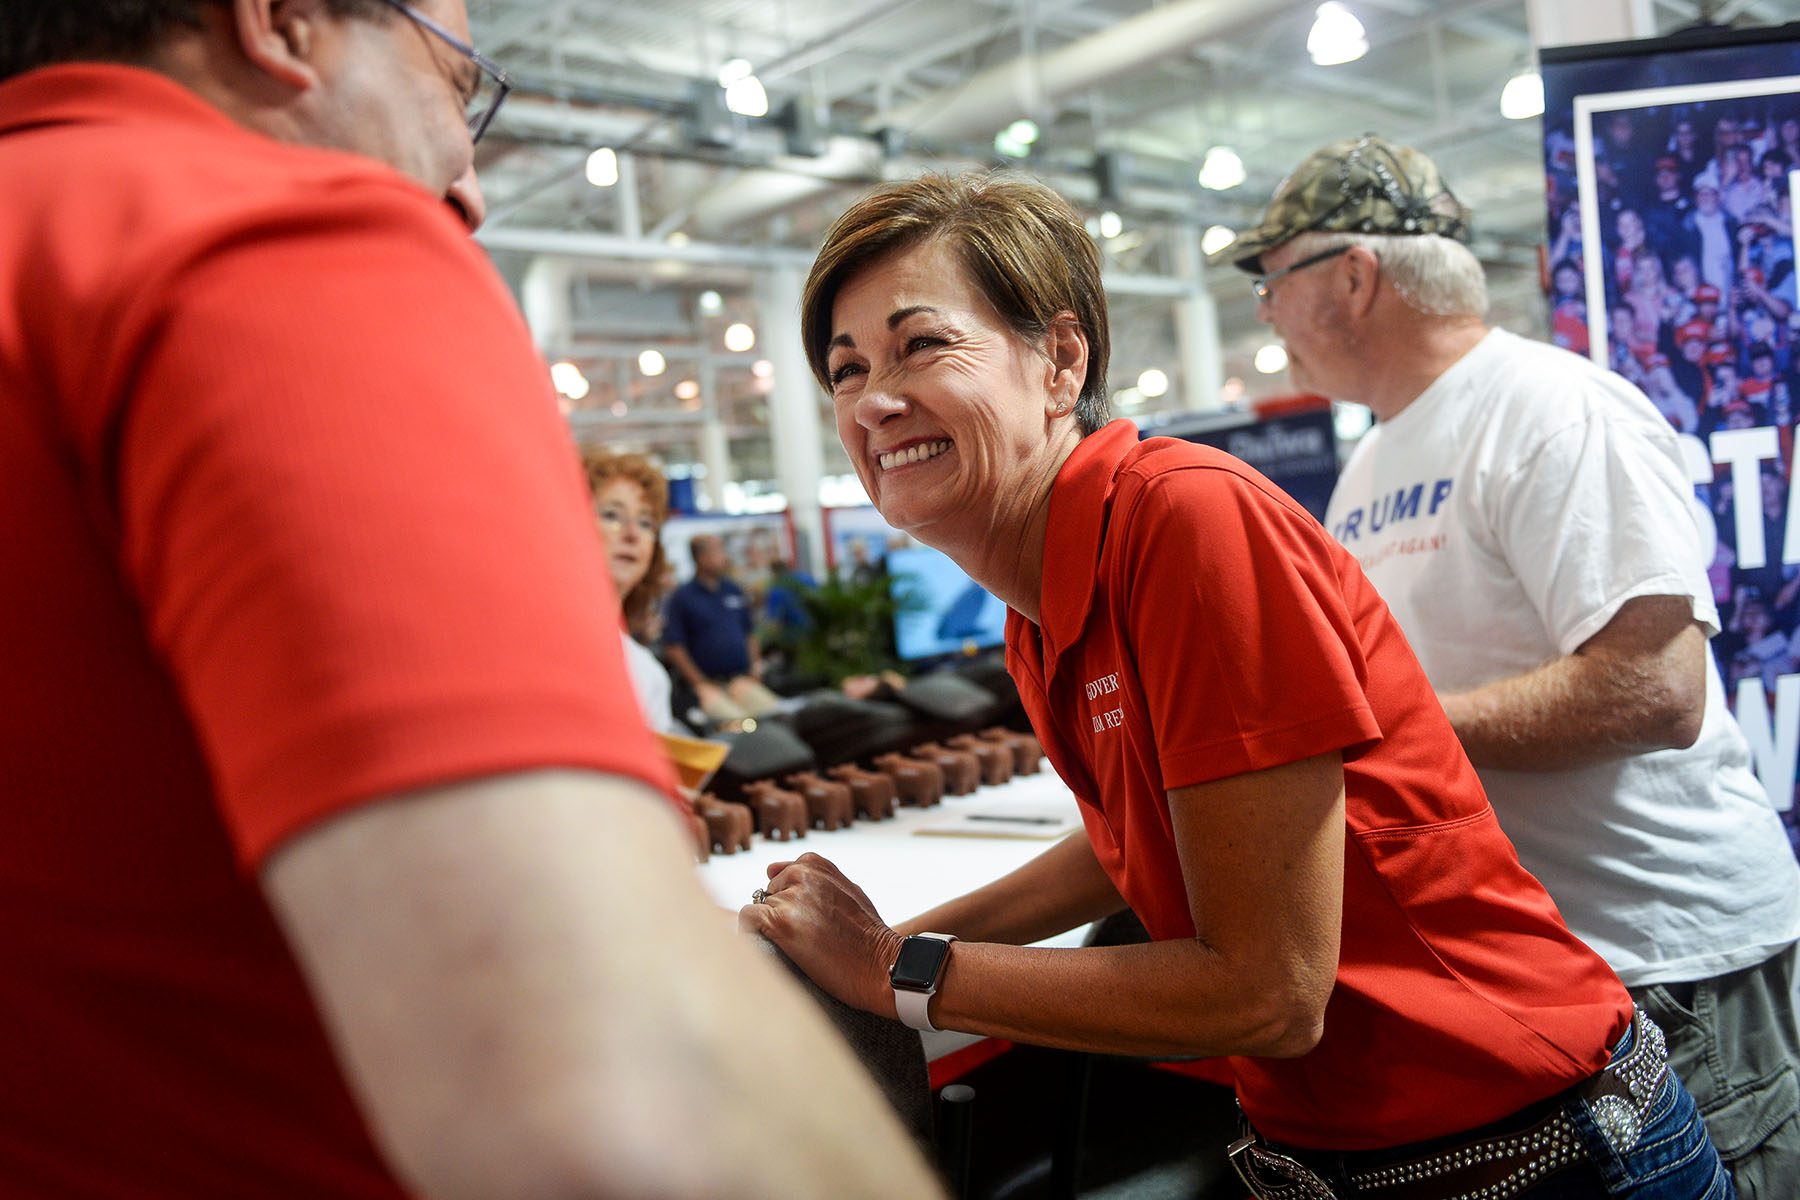 Gov. Kim Reynolds laughs while conversing with Jeff Kaufmann and the Iowa State Fair.